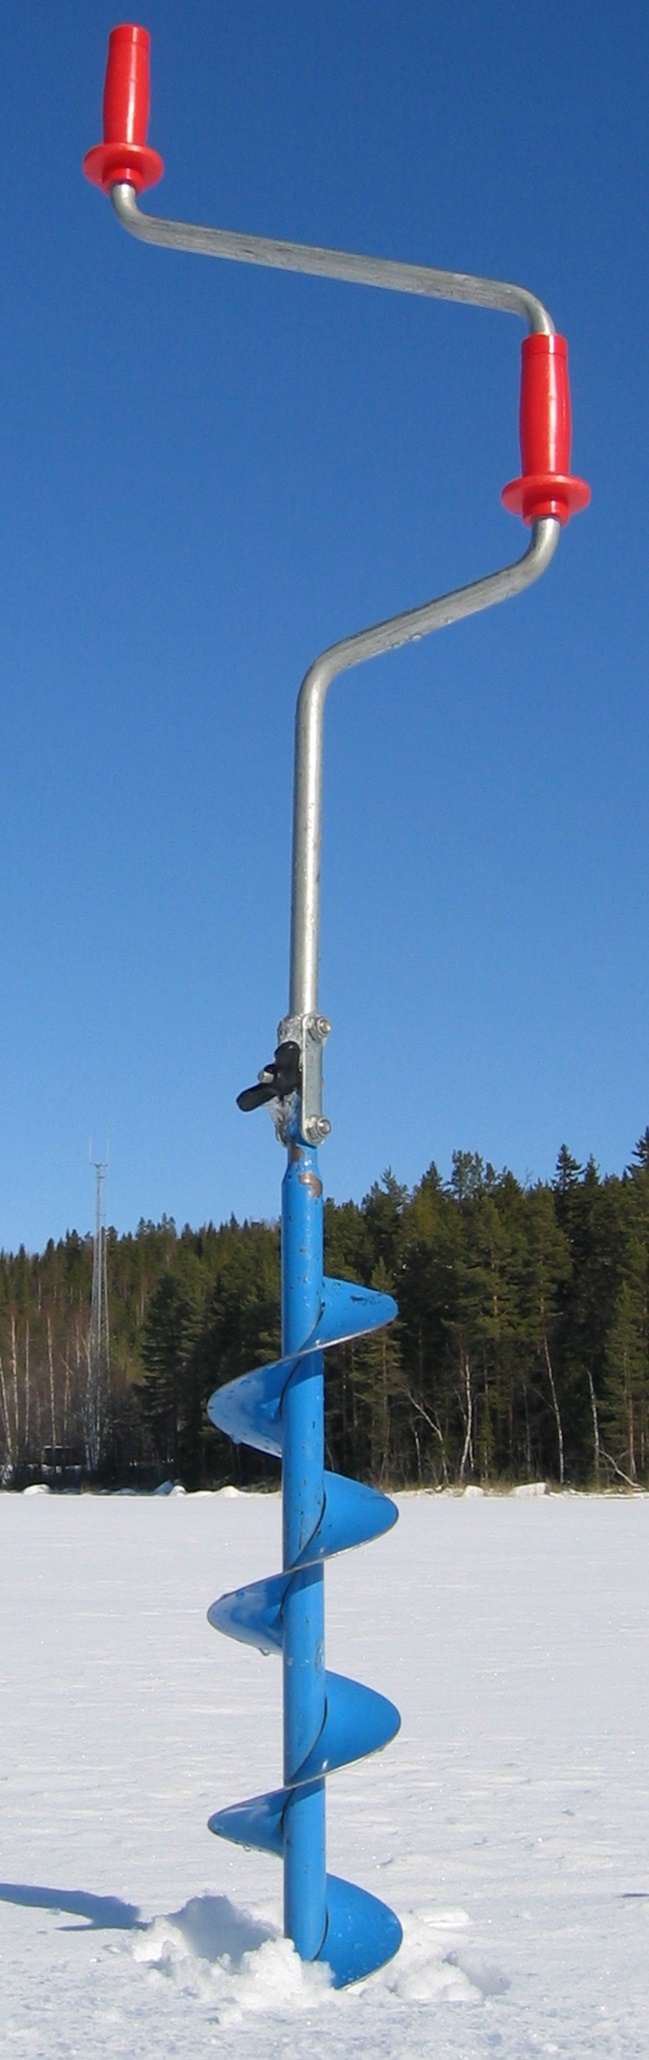 https://upload.wikimedia.org/wikipedia/commons/6/63/Ice_auger_cropped.jpg